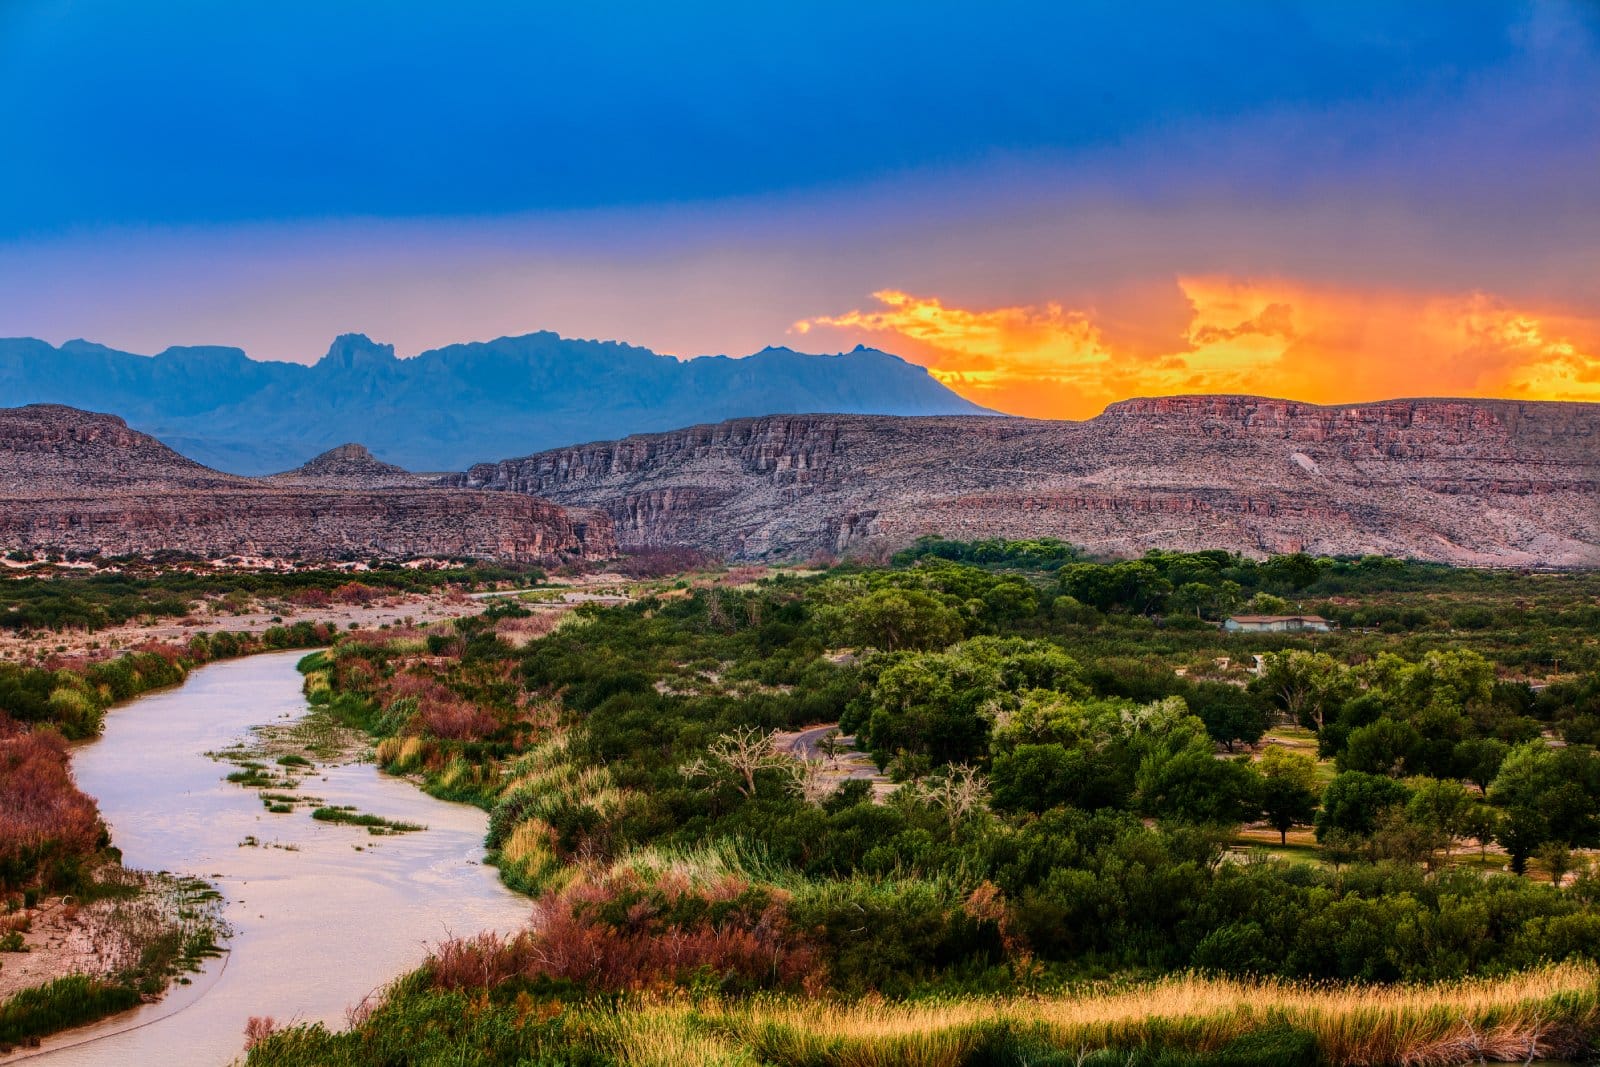 <p><span>For outdoor enthusiasts, Big Bend offers some of the most breathtaking landscapes in the USA. Hike through deserts, rivers, and mountains while spotting diverse wildlife. Entry costs $30 per vehicle, making it a budget-friendly adventure.</span></p>